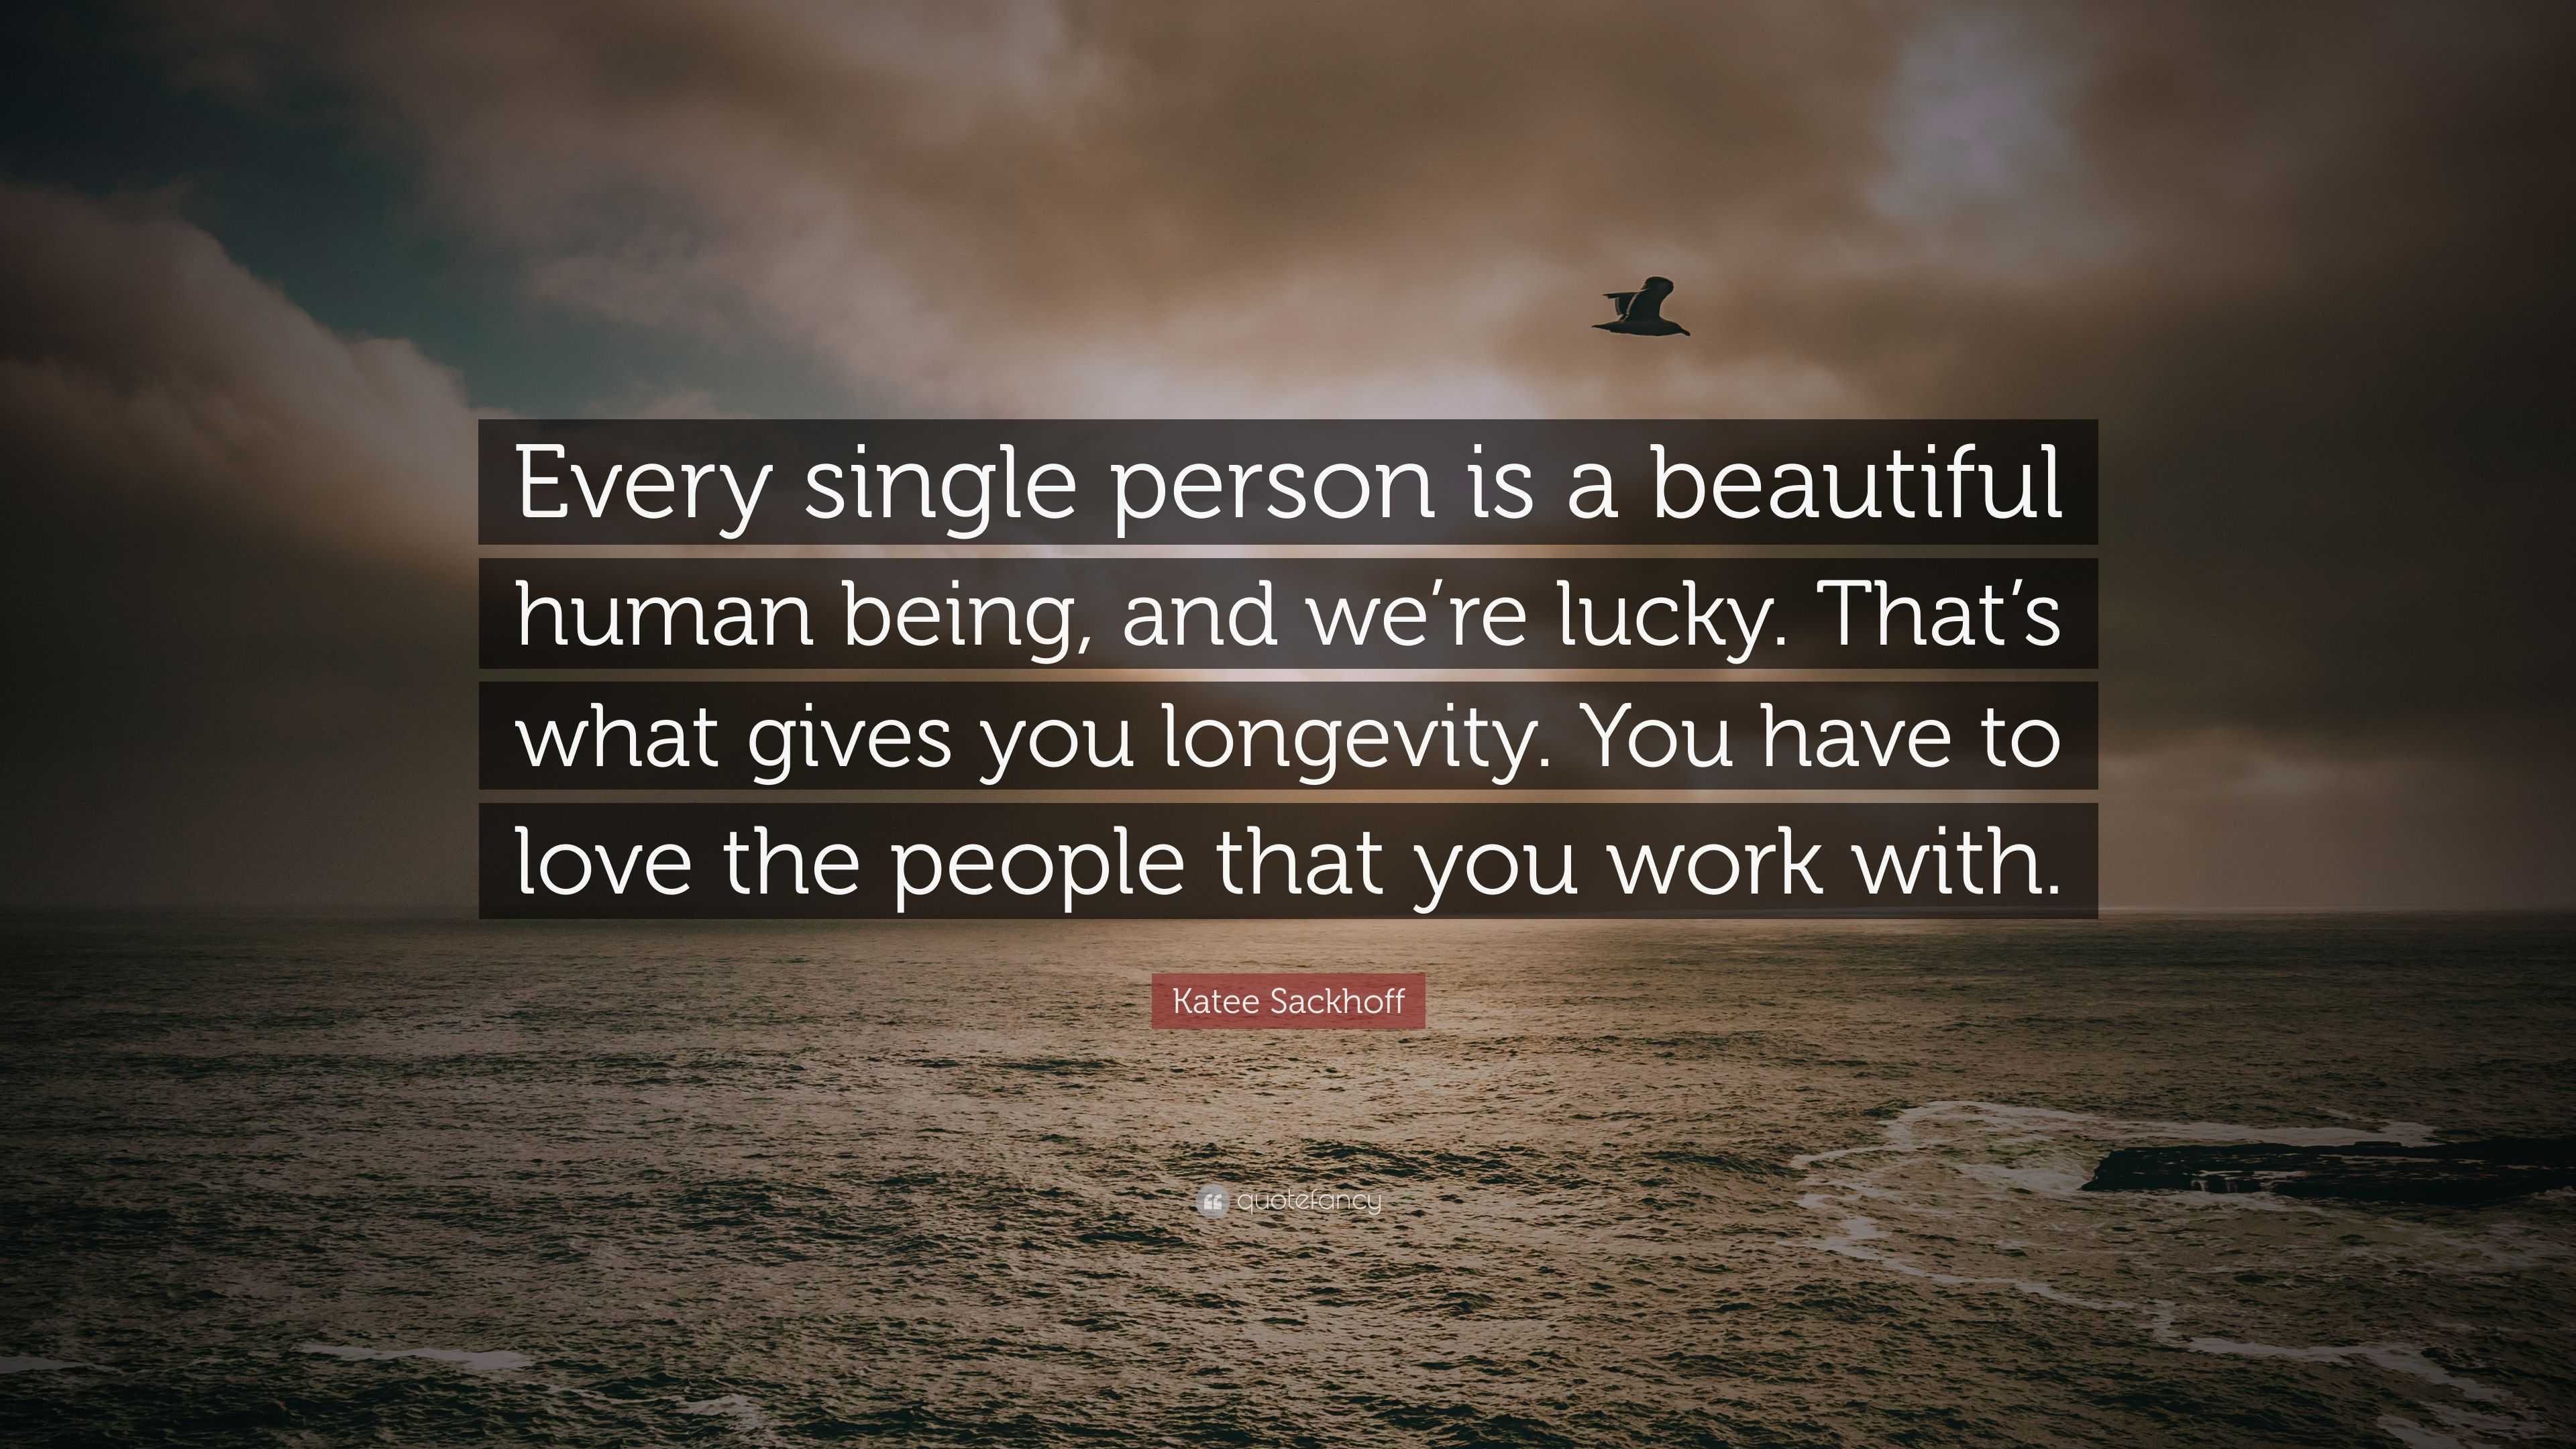 Katee Sackhoff Quote “Every single person is a beautiful human ...